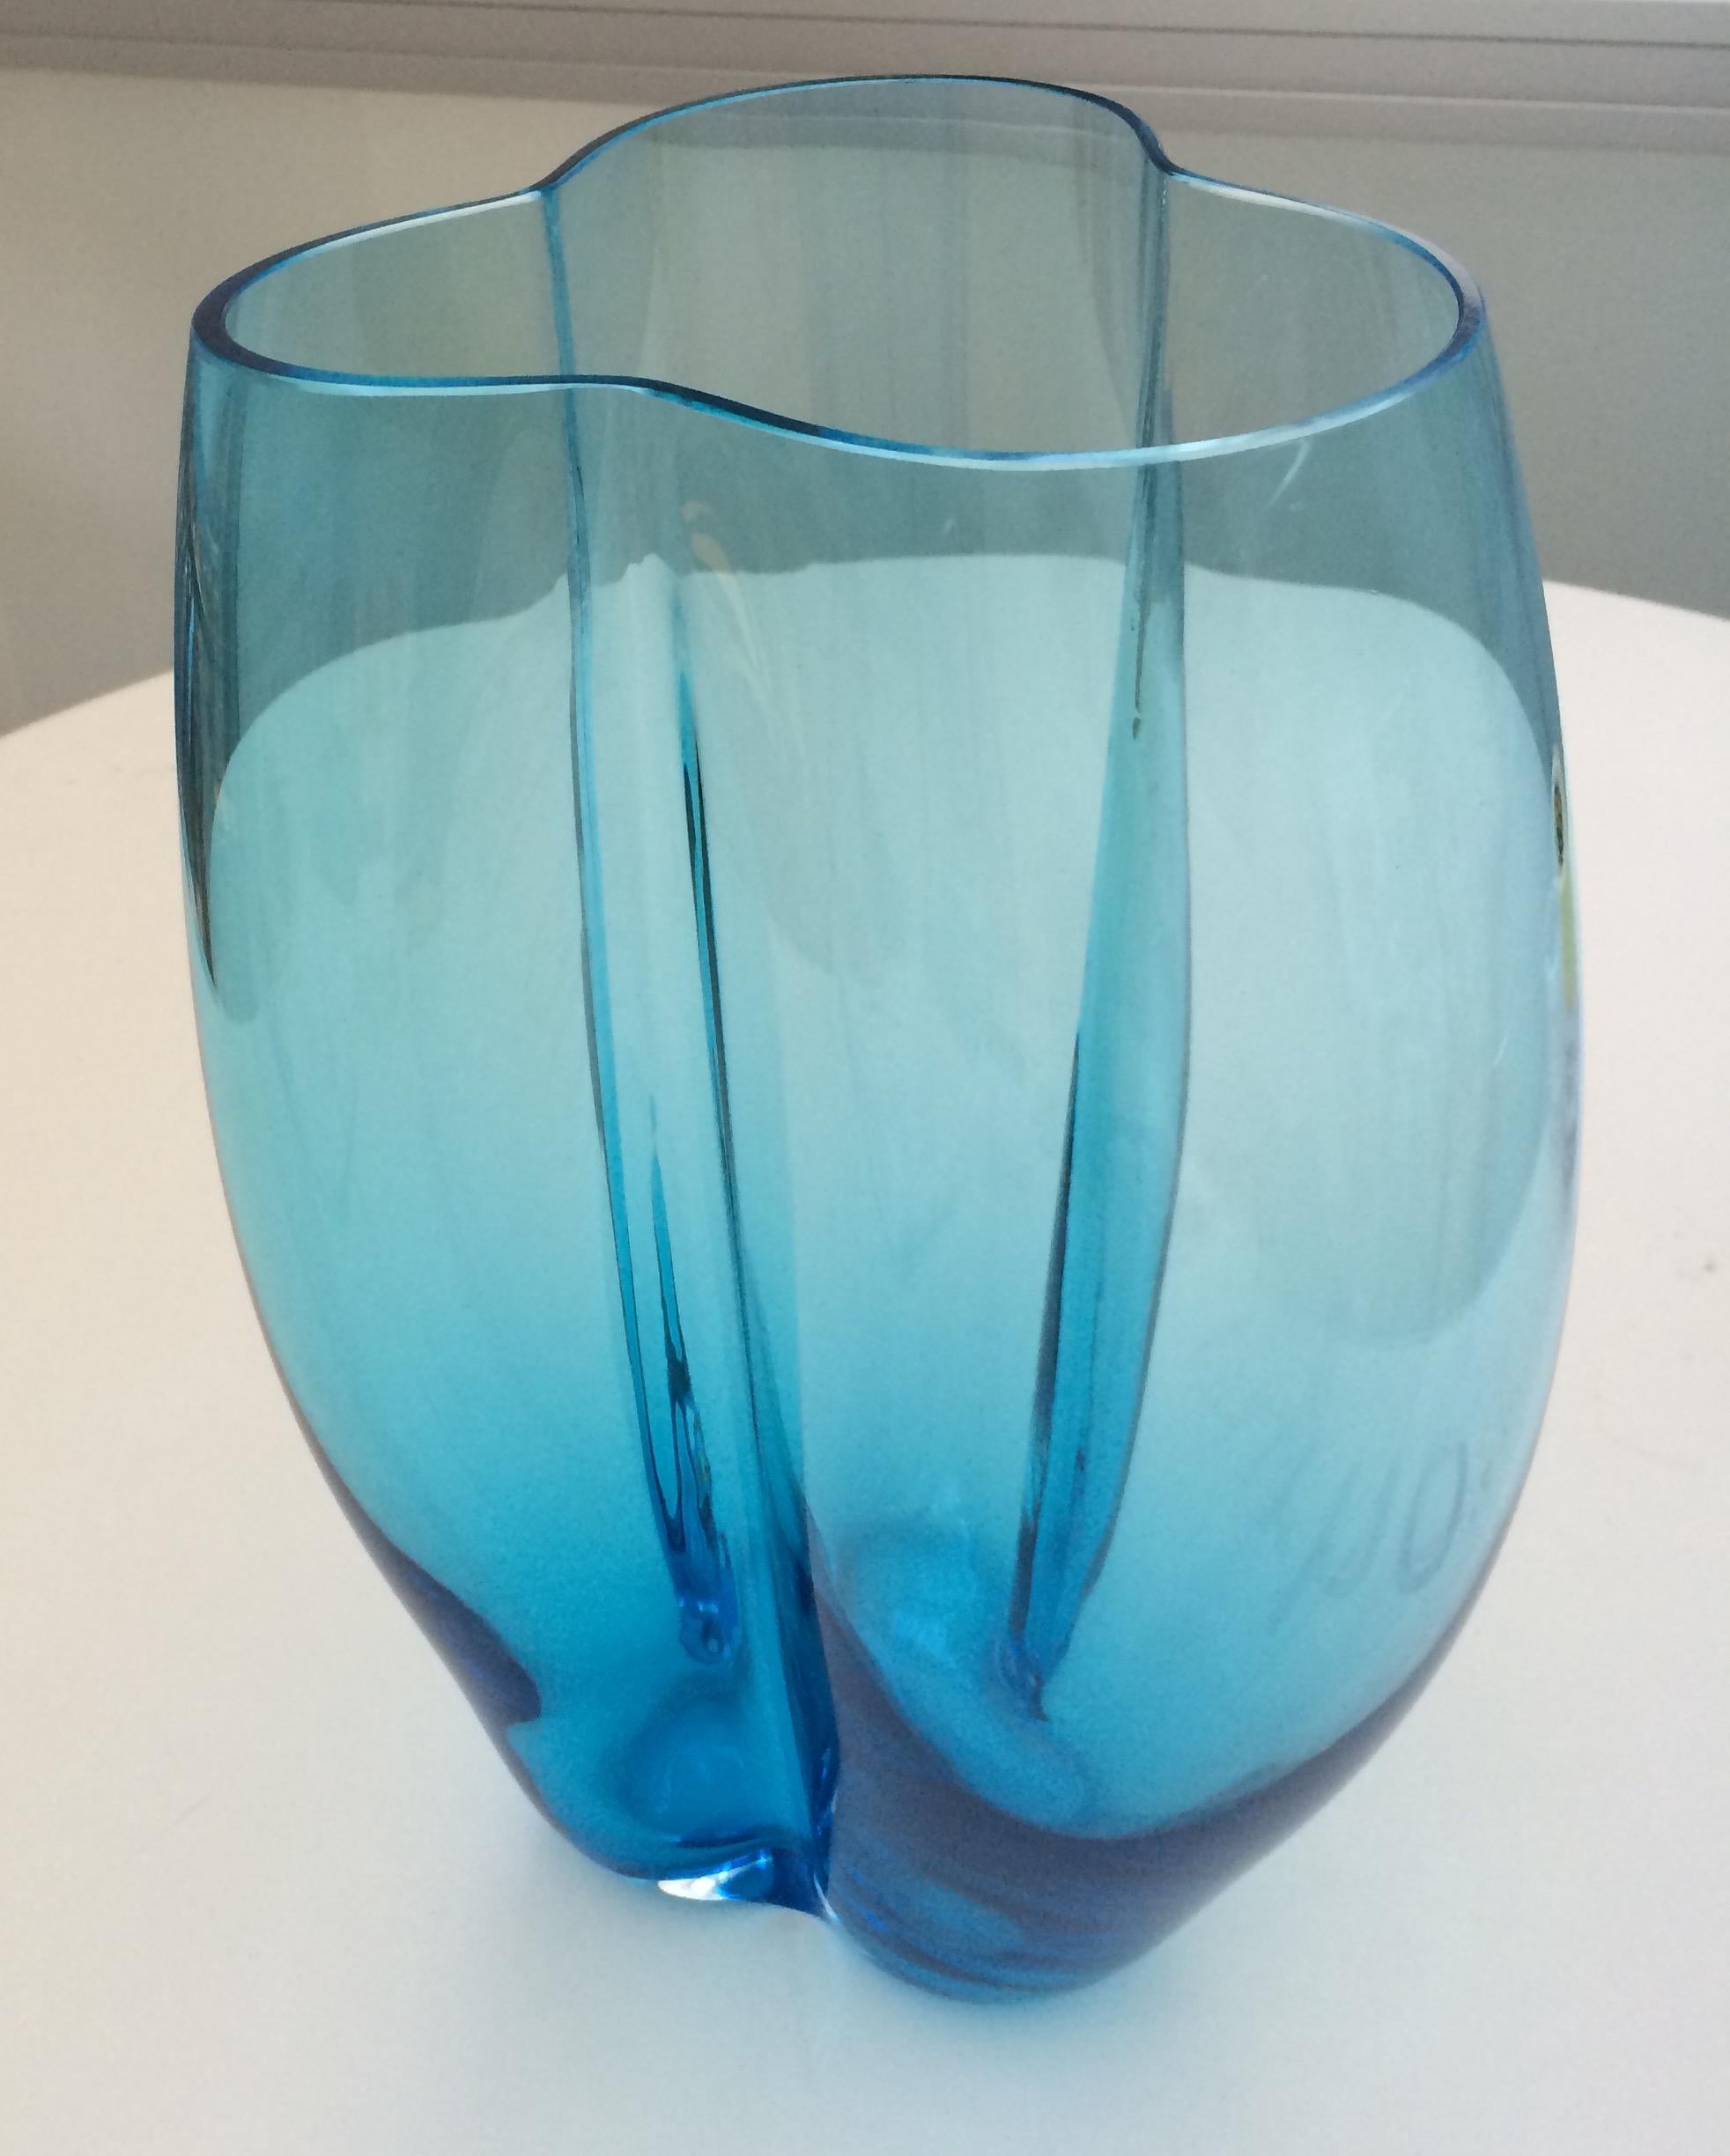 21st century Alessandro Mendini, Petalo large vase 3 petals, Murano glass, various colors
Petal is a rounded vase that, thanks to some fine metal wires, when blown creates lobed shapes that resemble petals. Designed by Alessandro Mendini, Petalo